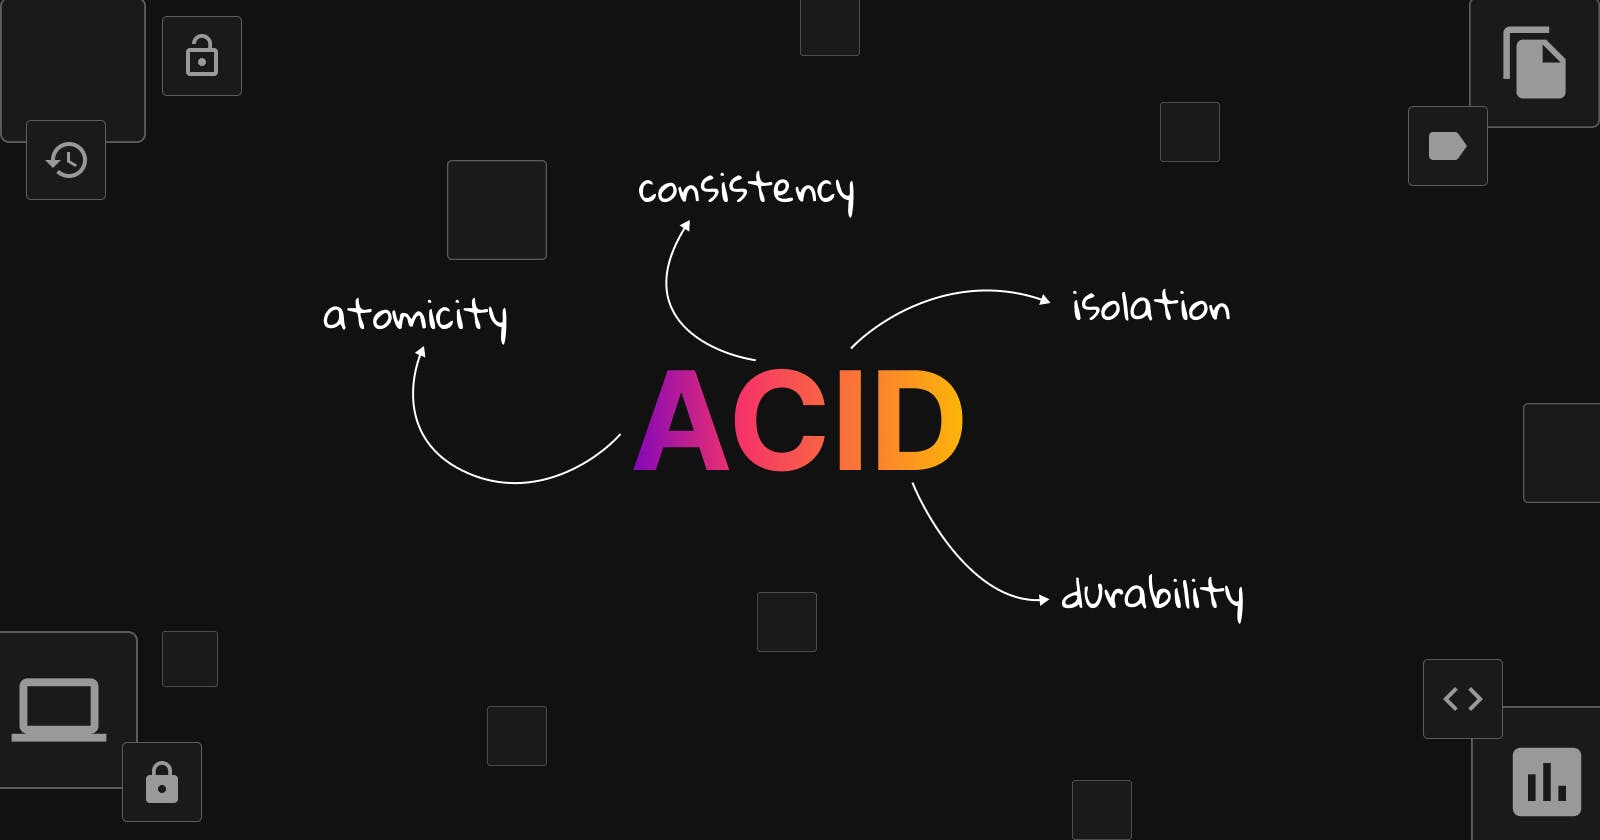 So, what are ACID Properties?